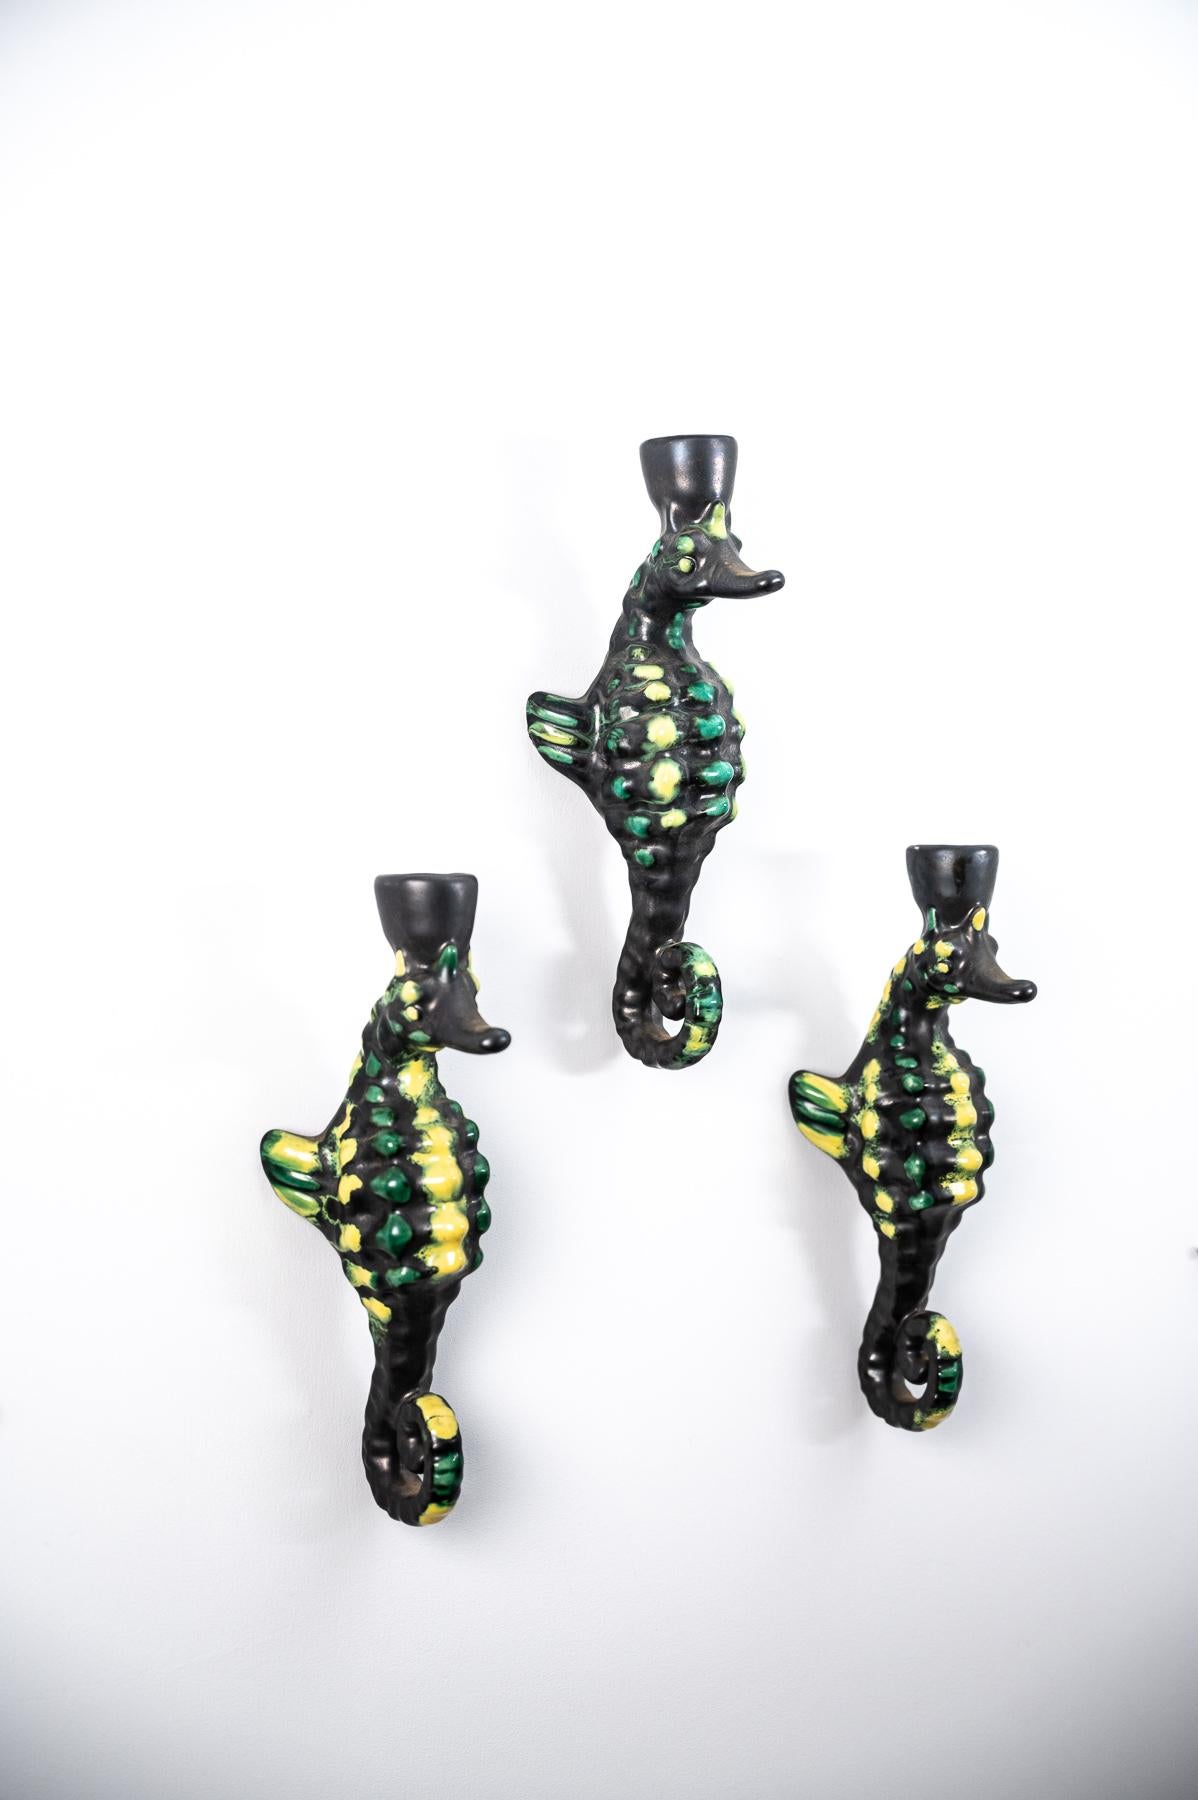 set of three mid century Vallauris ceramic seahorse wall lights by Albert Ferlay

Stamped to the underside “Creation A Ferlay Vallauris”

France circa 1950-60

(priced for the 3)

